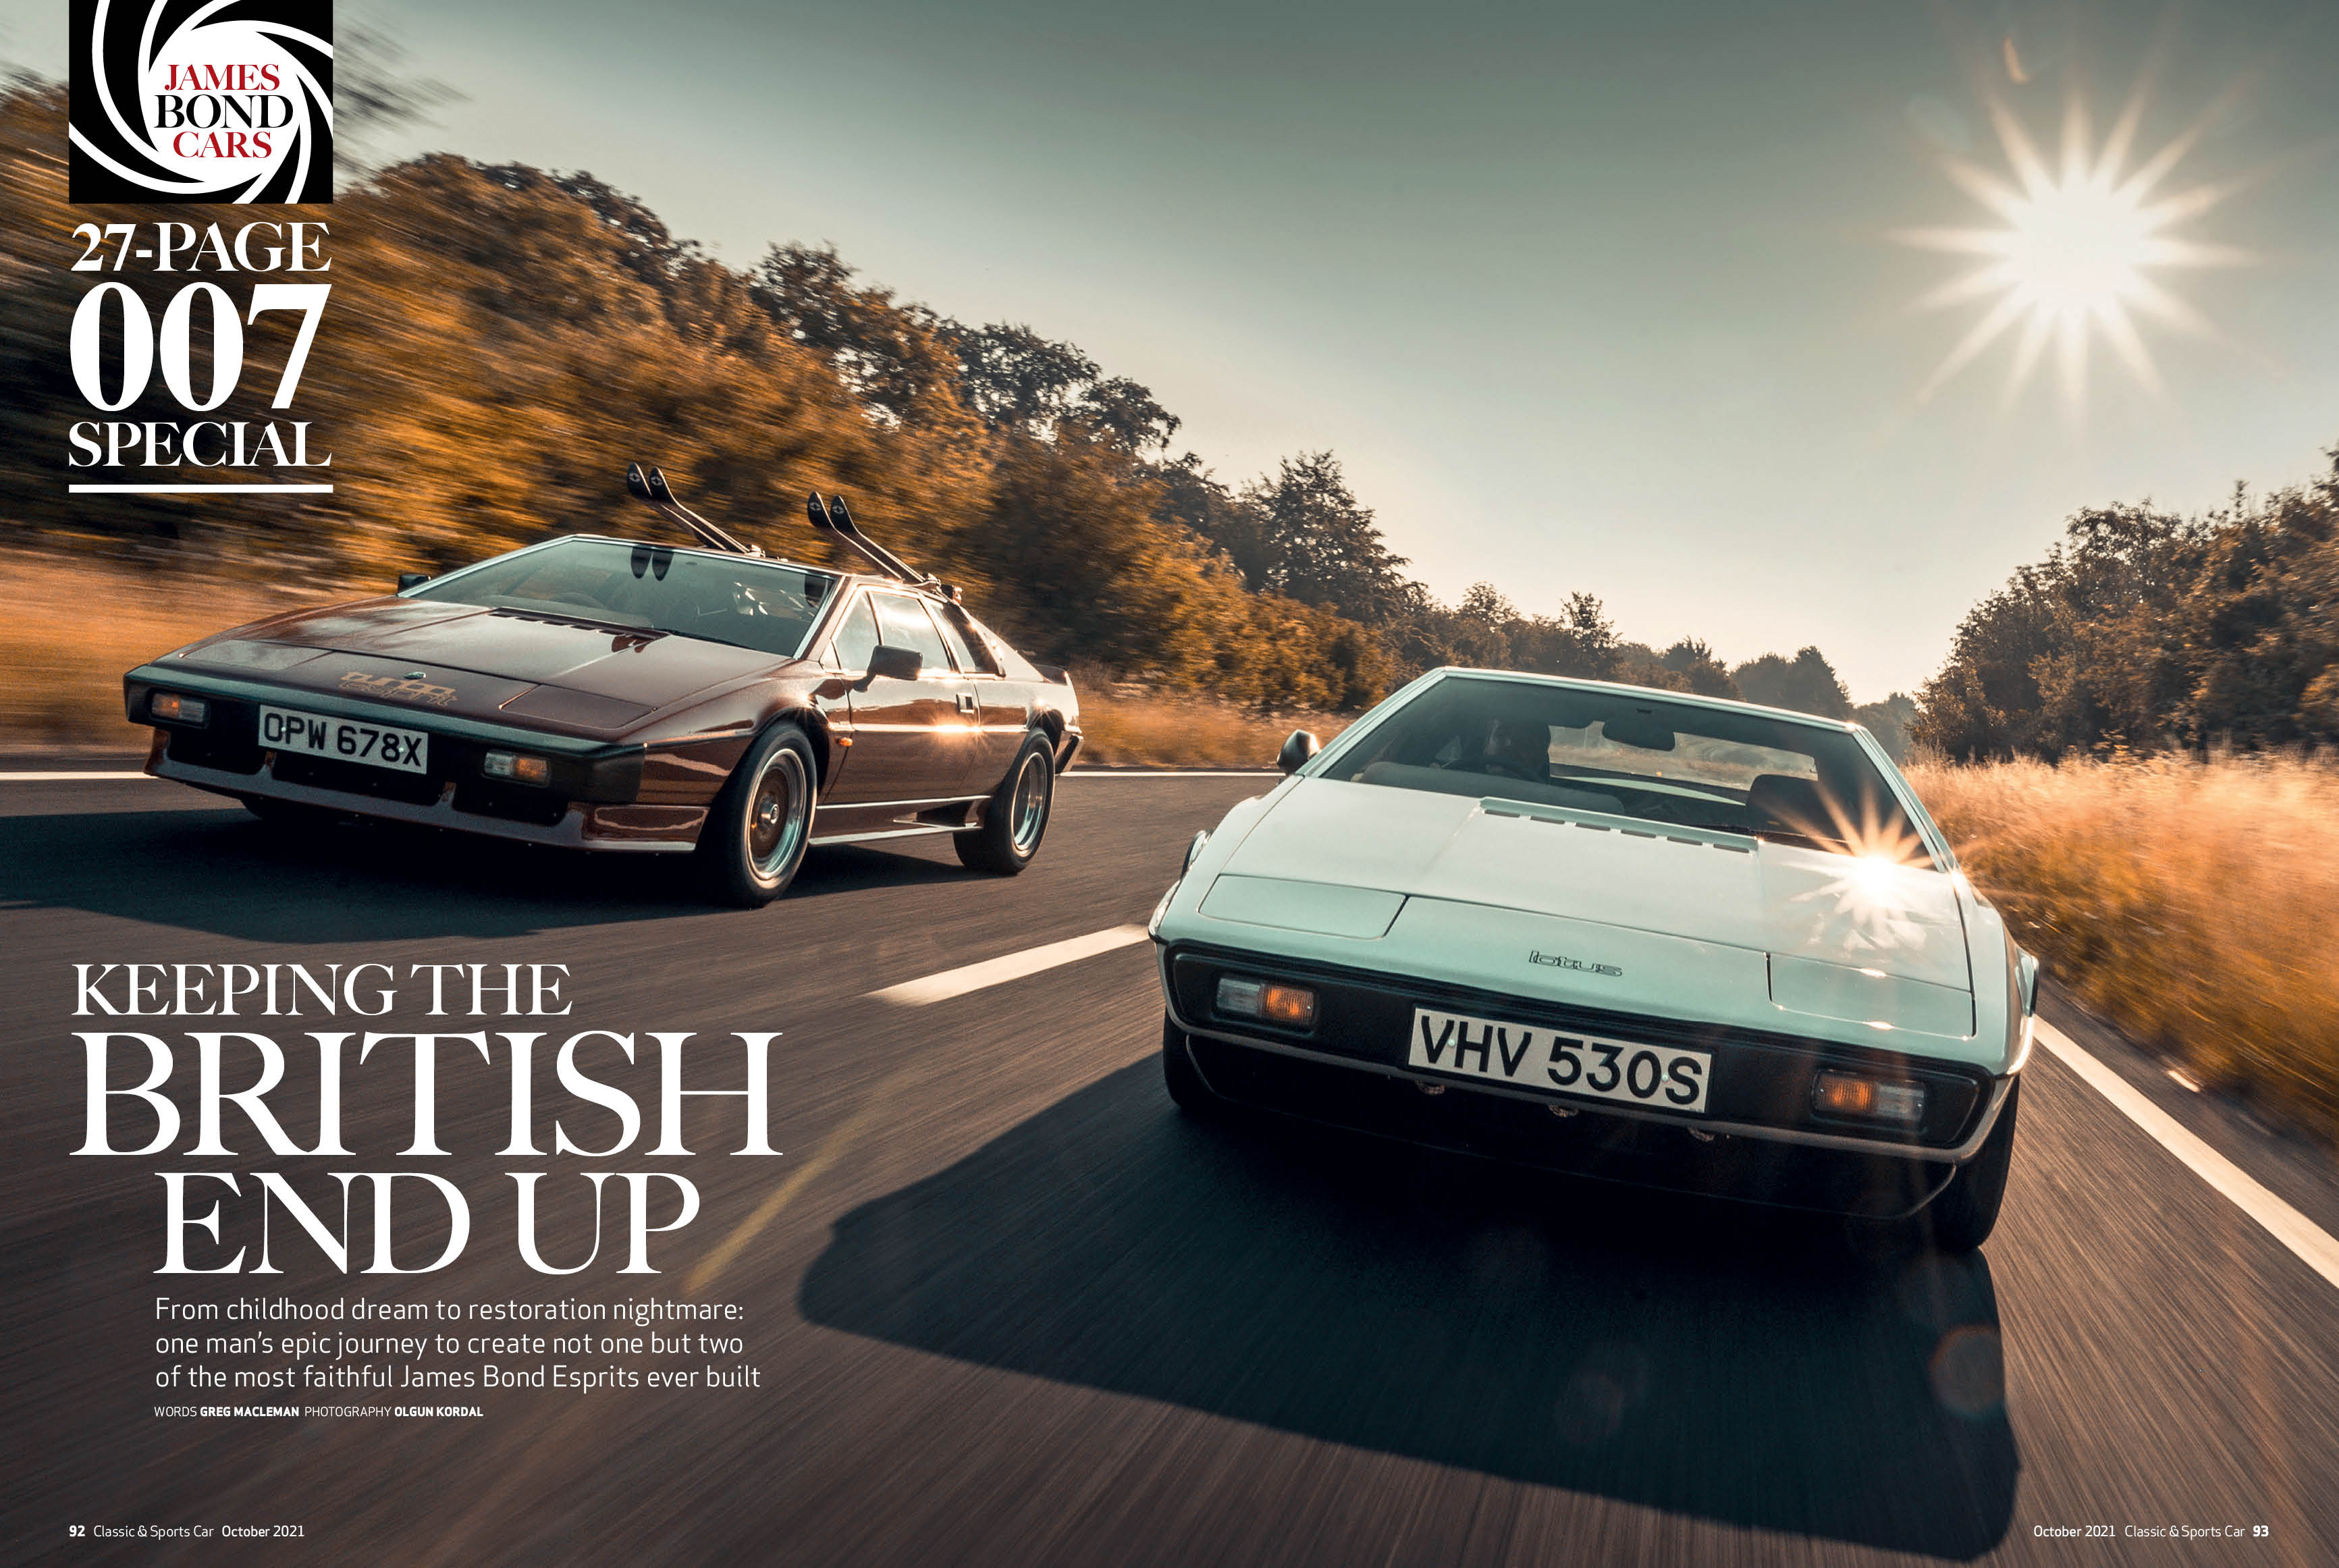 Classic & Sports Car – Greatest Bond cars: inside the October 2021 issue of C&SC